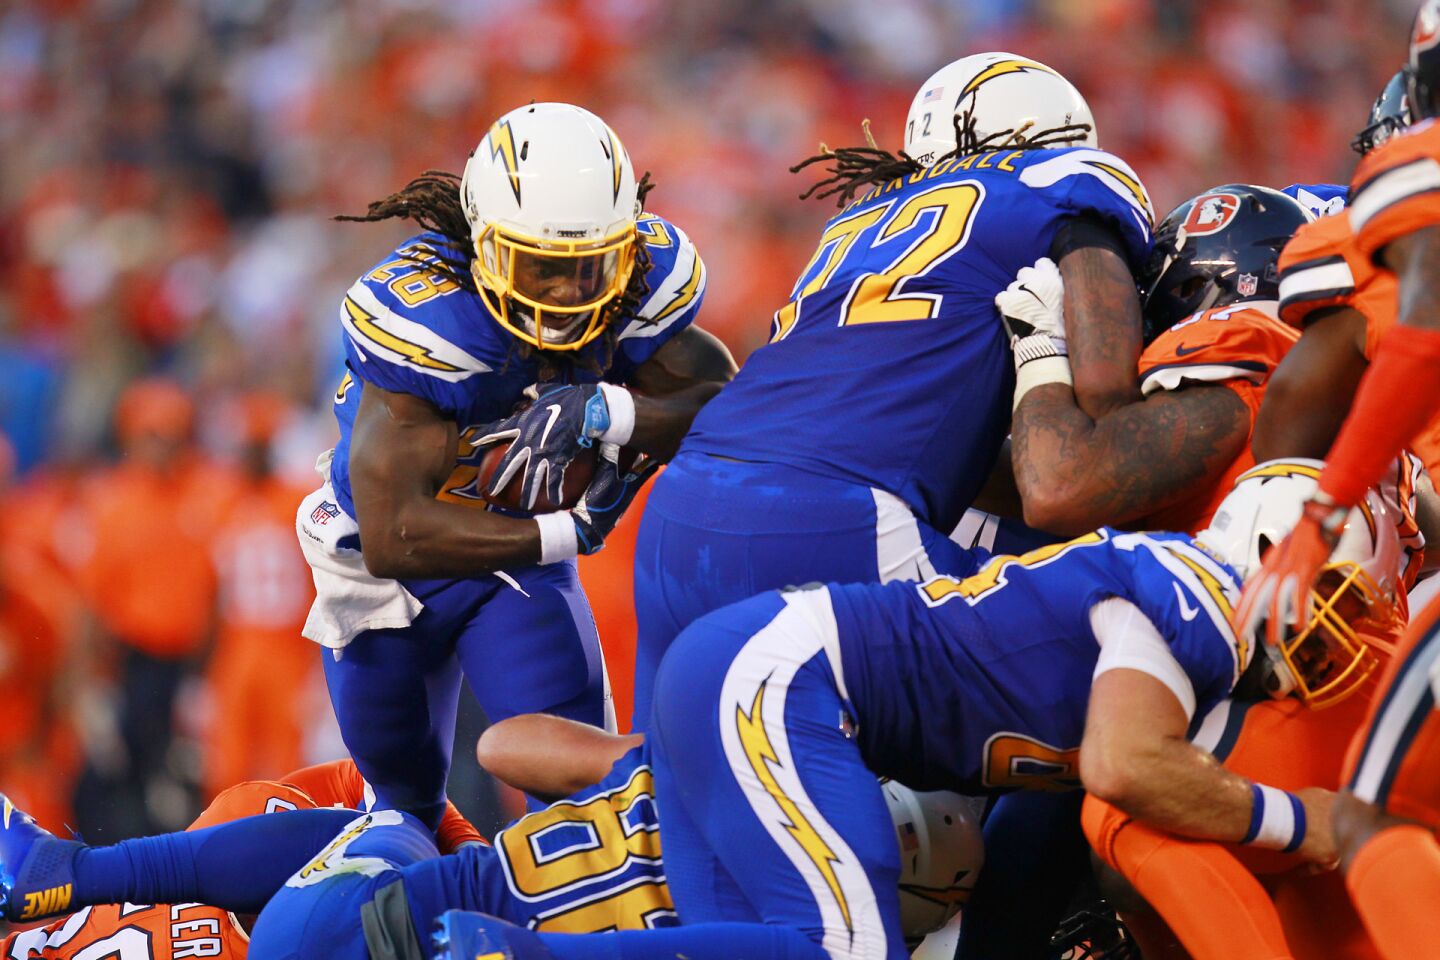 Chargers vs. Broncos 10/13/16